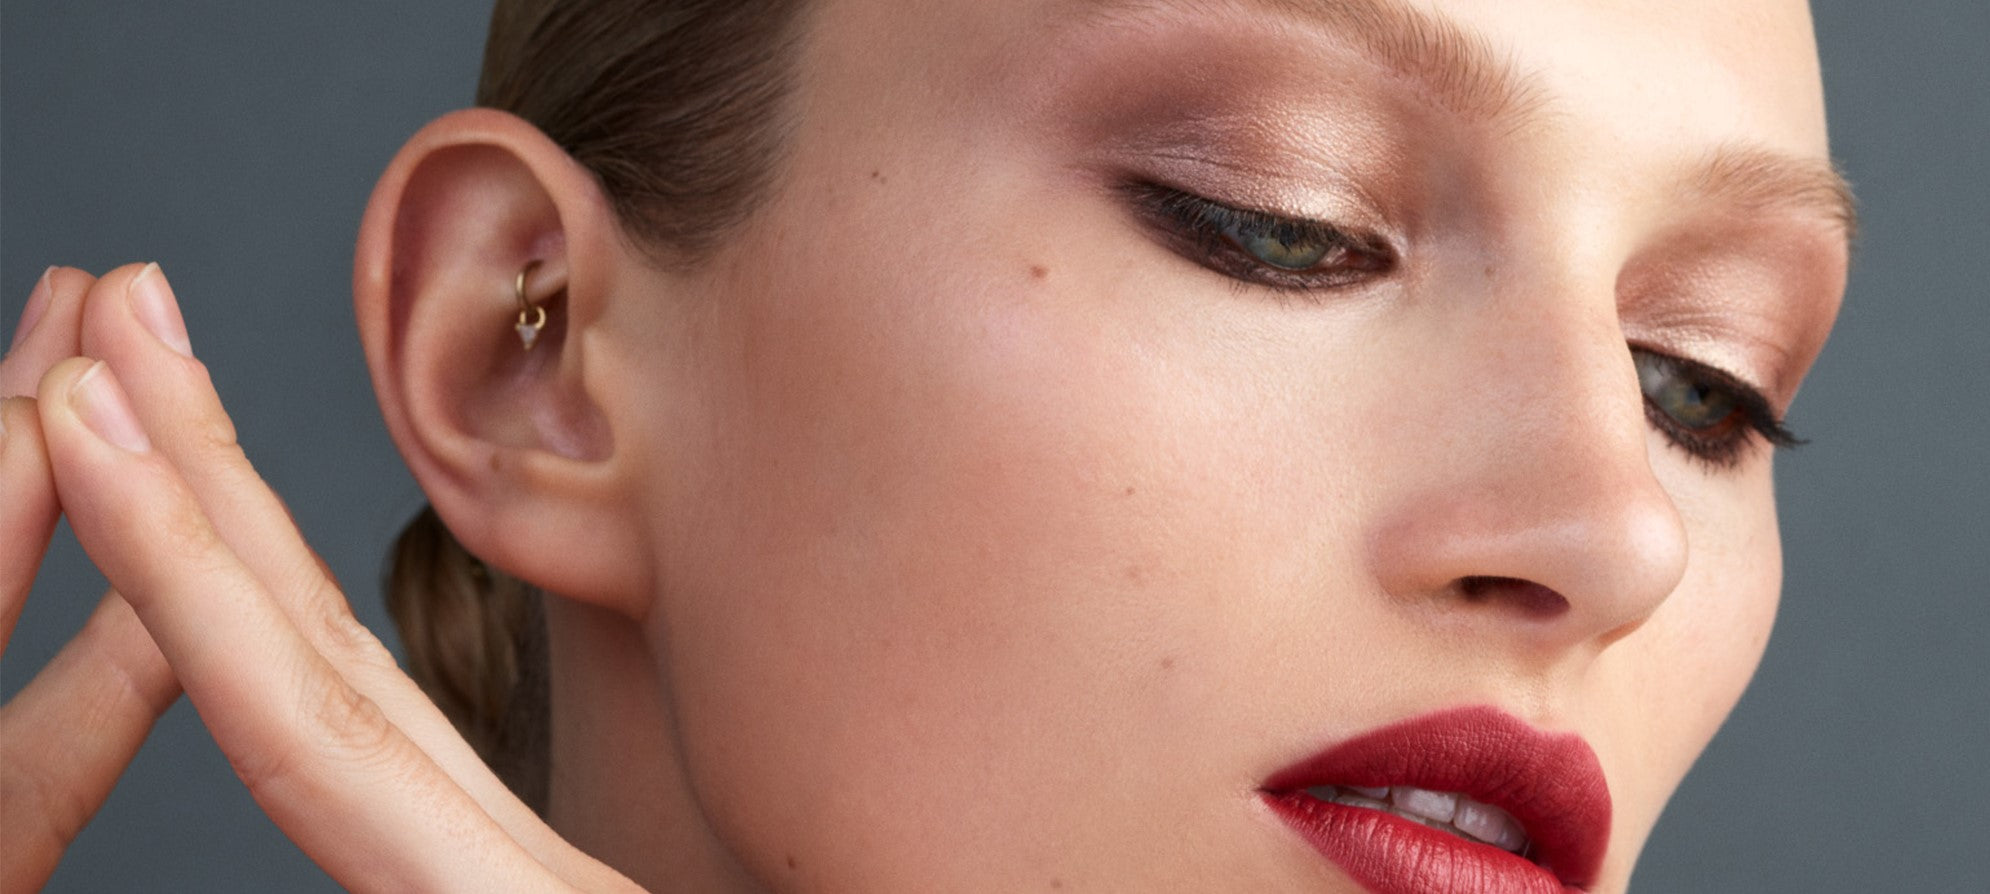 How to Cover a Black Eye With Makeup - Bellatory